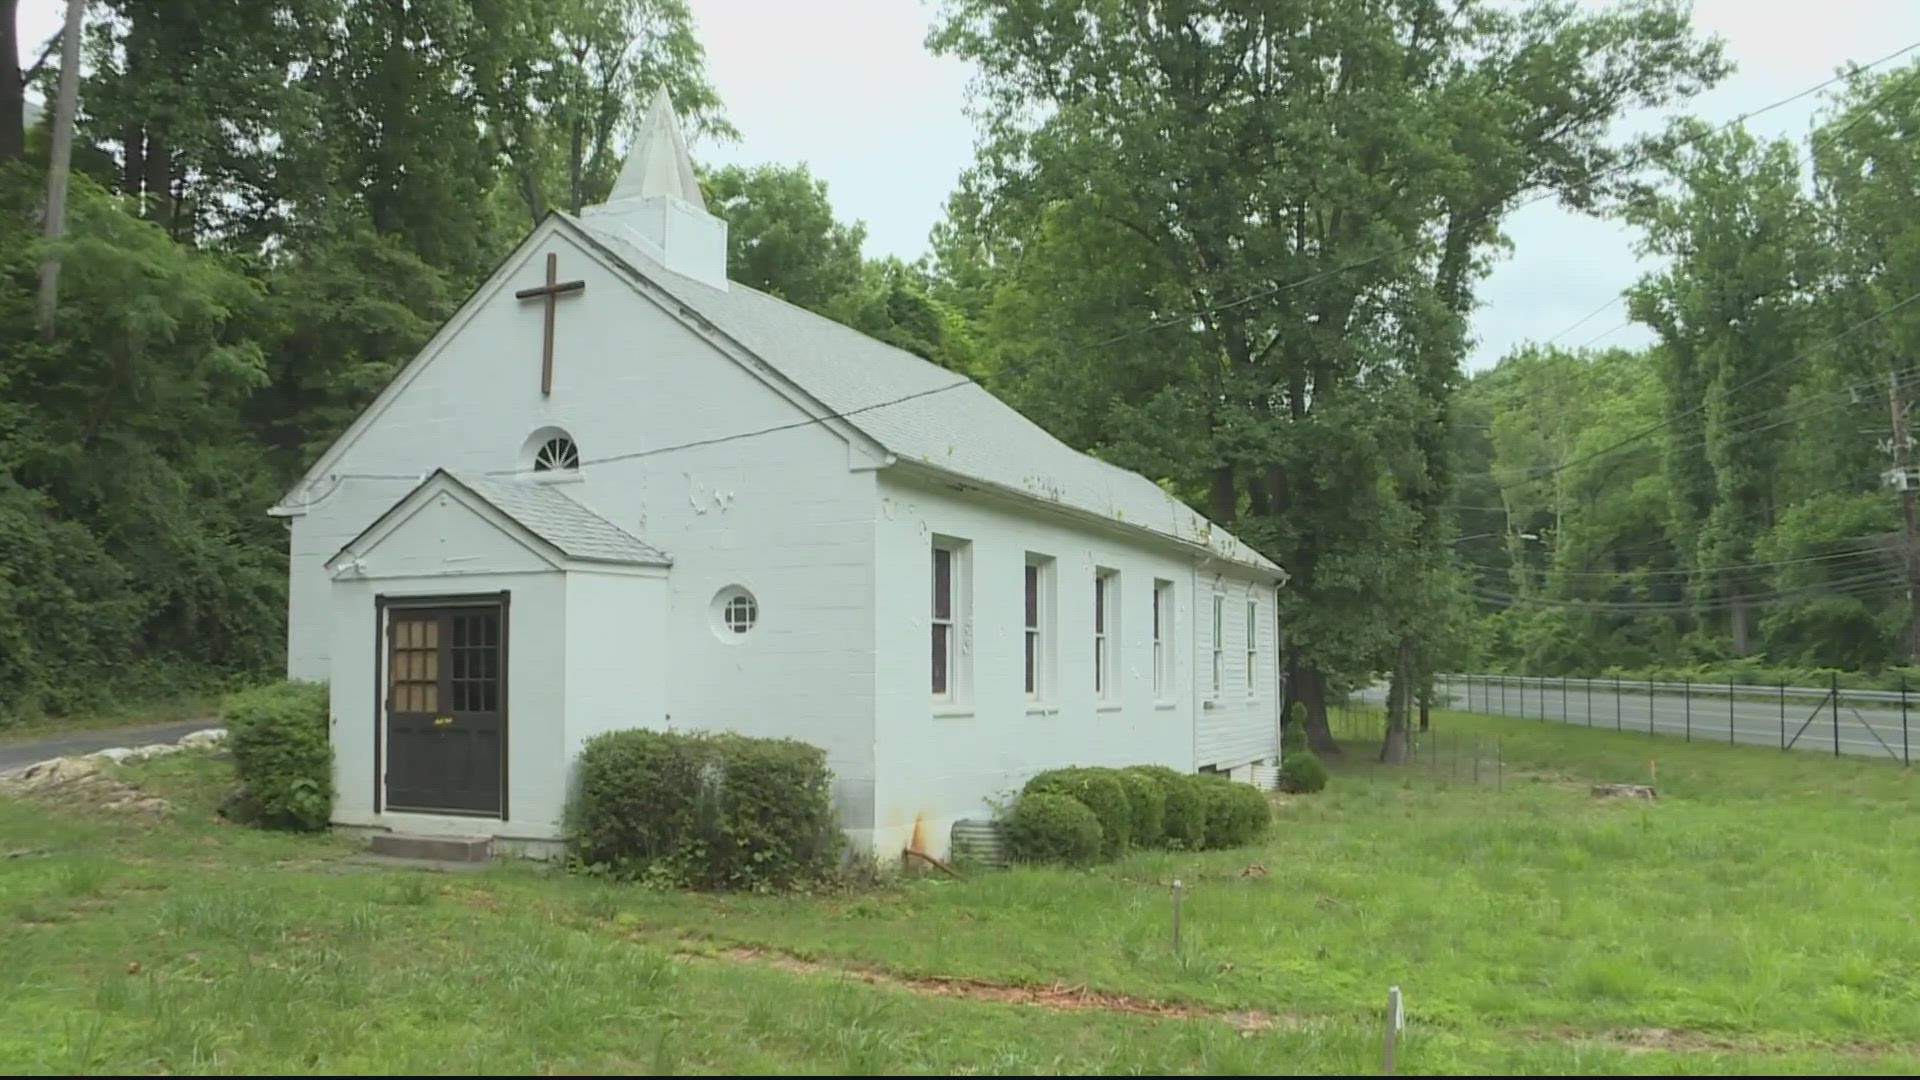 Scotland AME Zion Church is in desperate need of help. Here's how the community is coming together to save it.